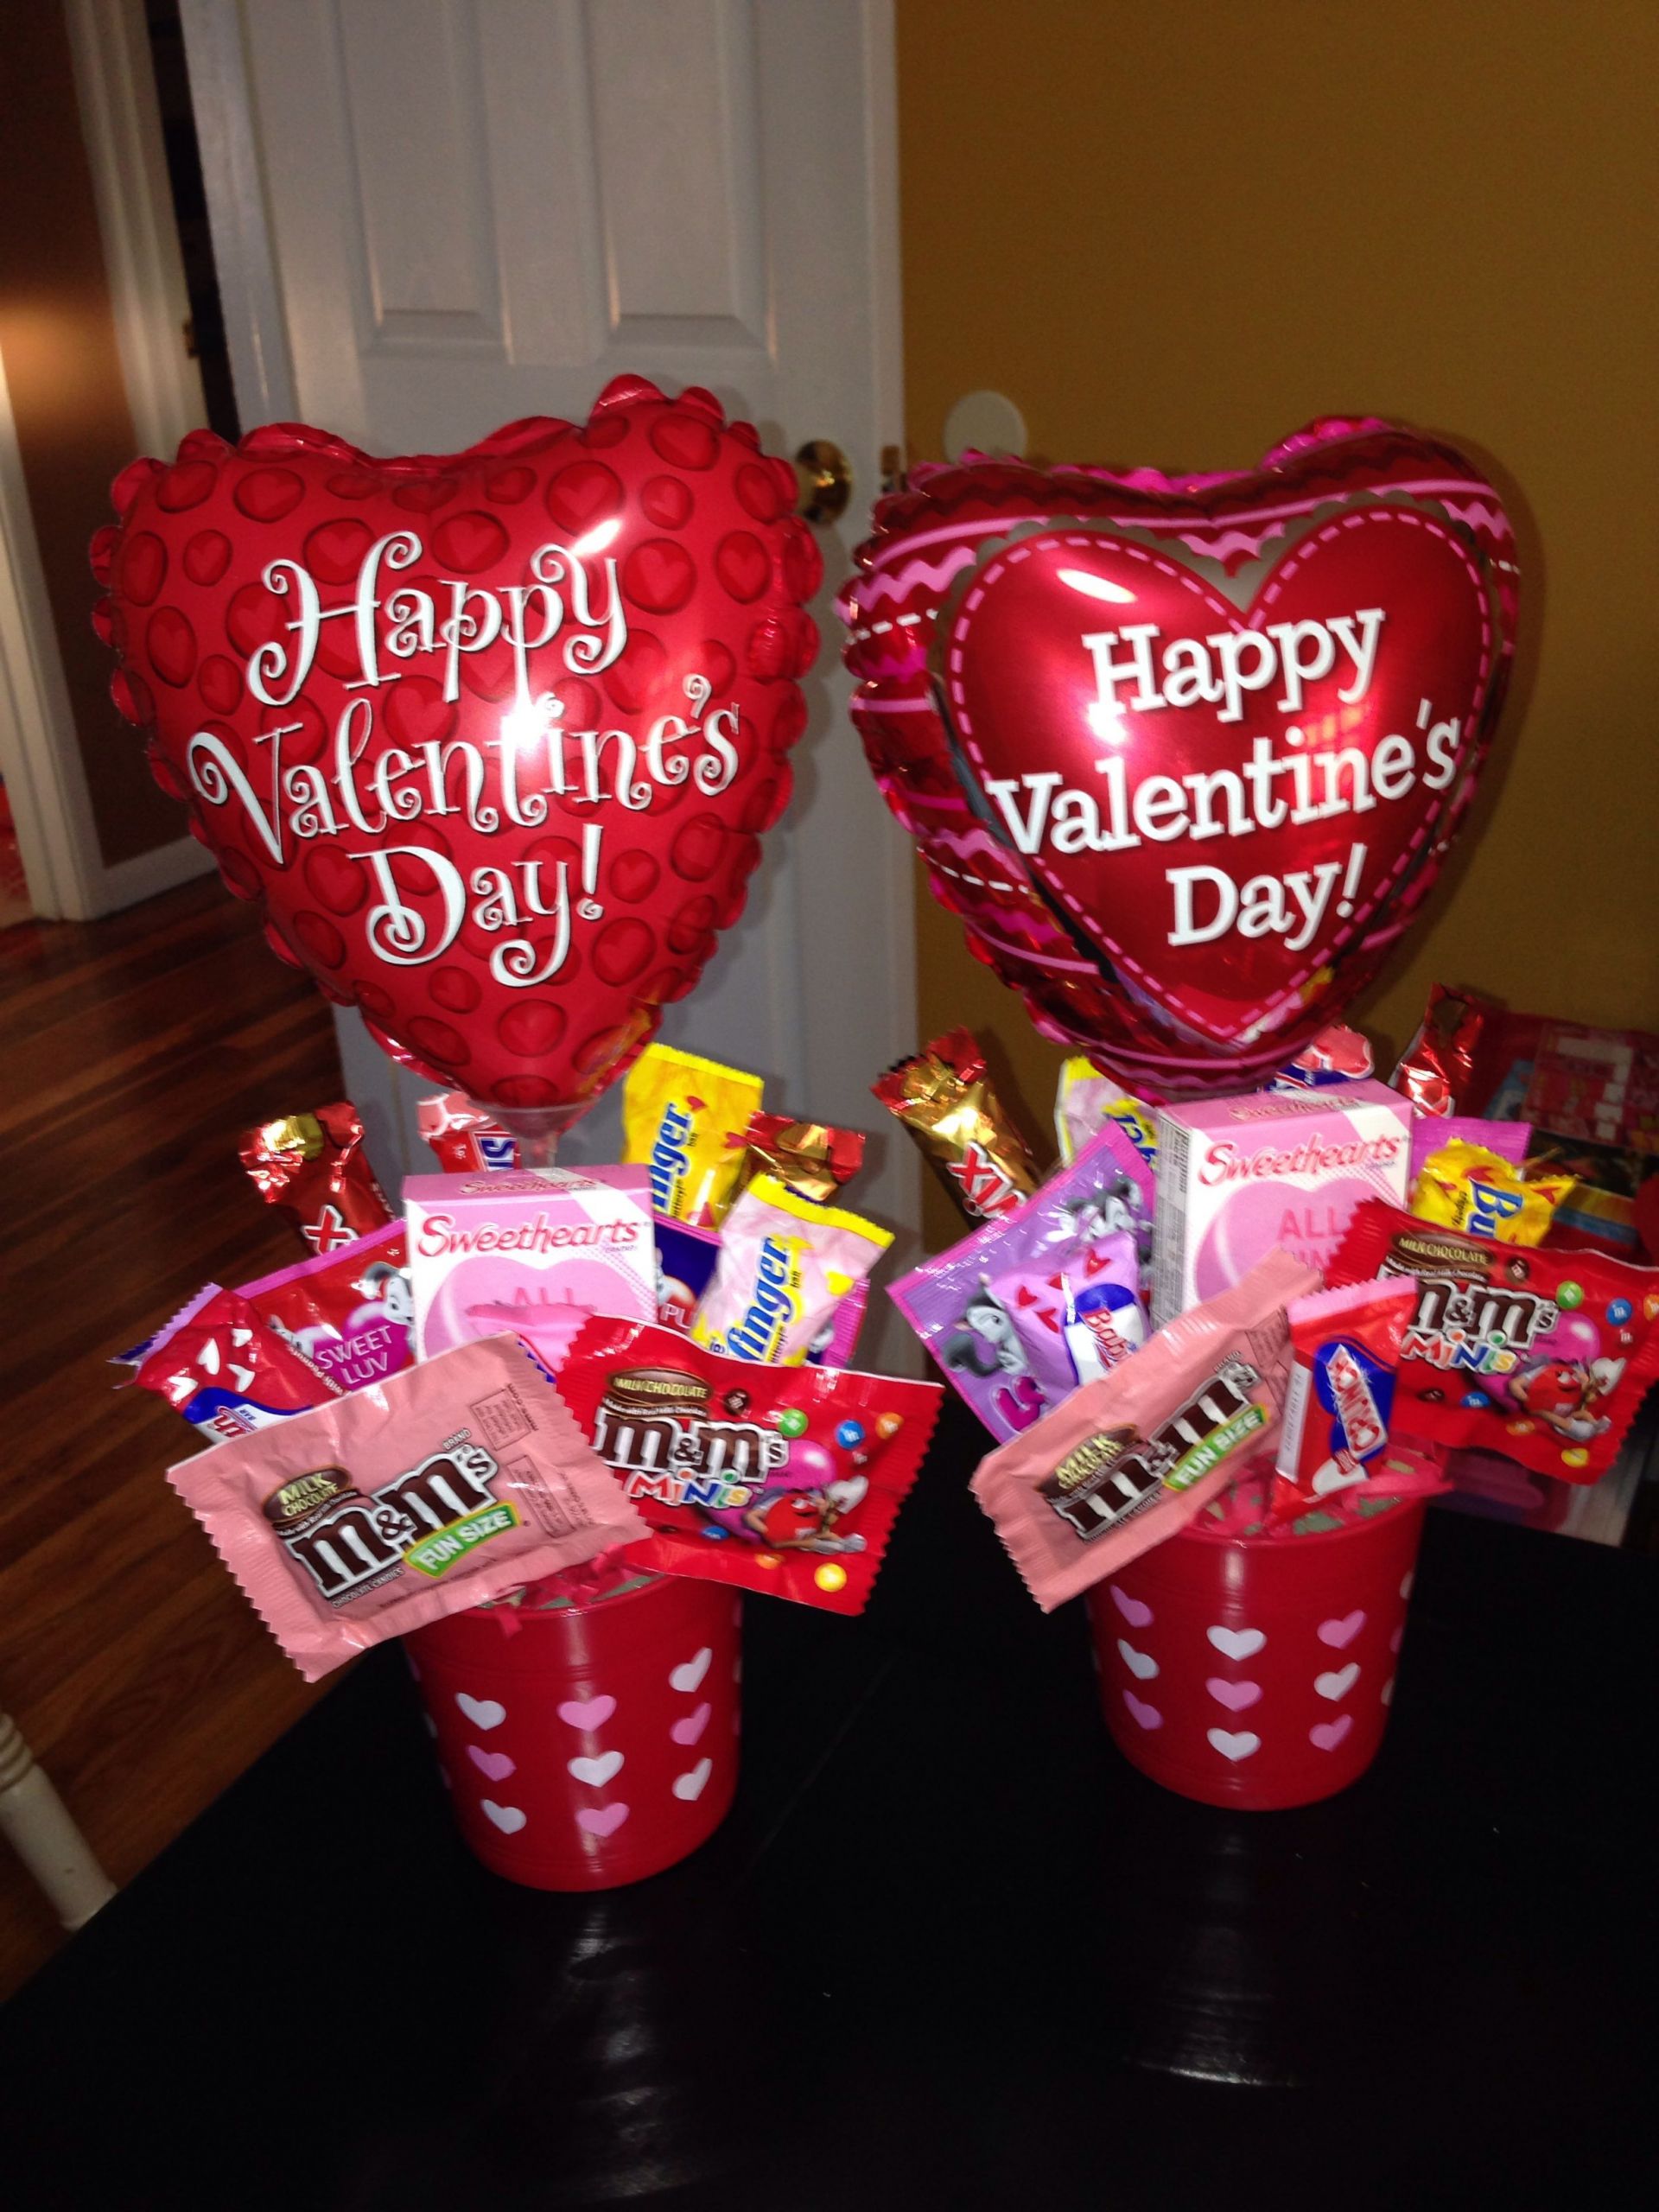 Valentine Day Gift Ideas Inexpensive
 Small valentines bouquets